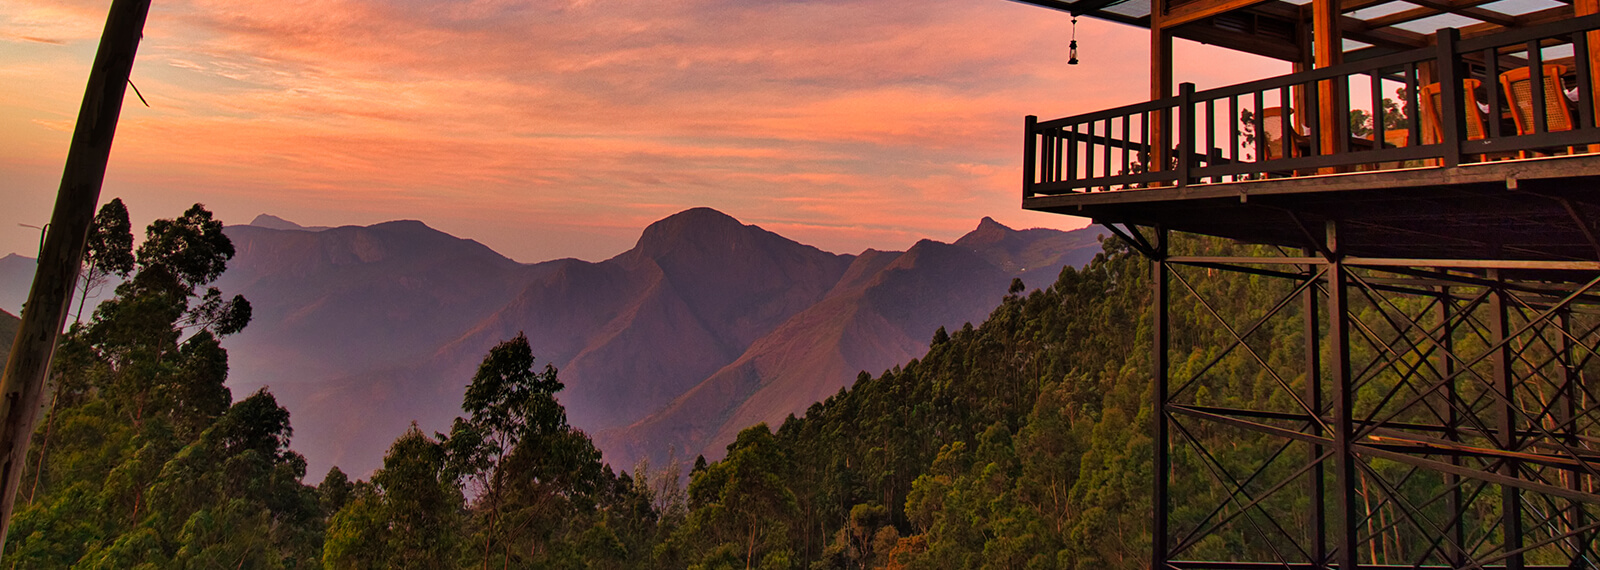 luxury hotels and resorts munnar